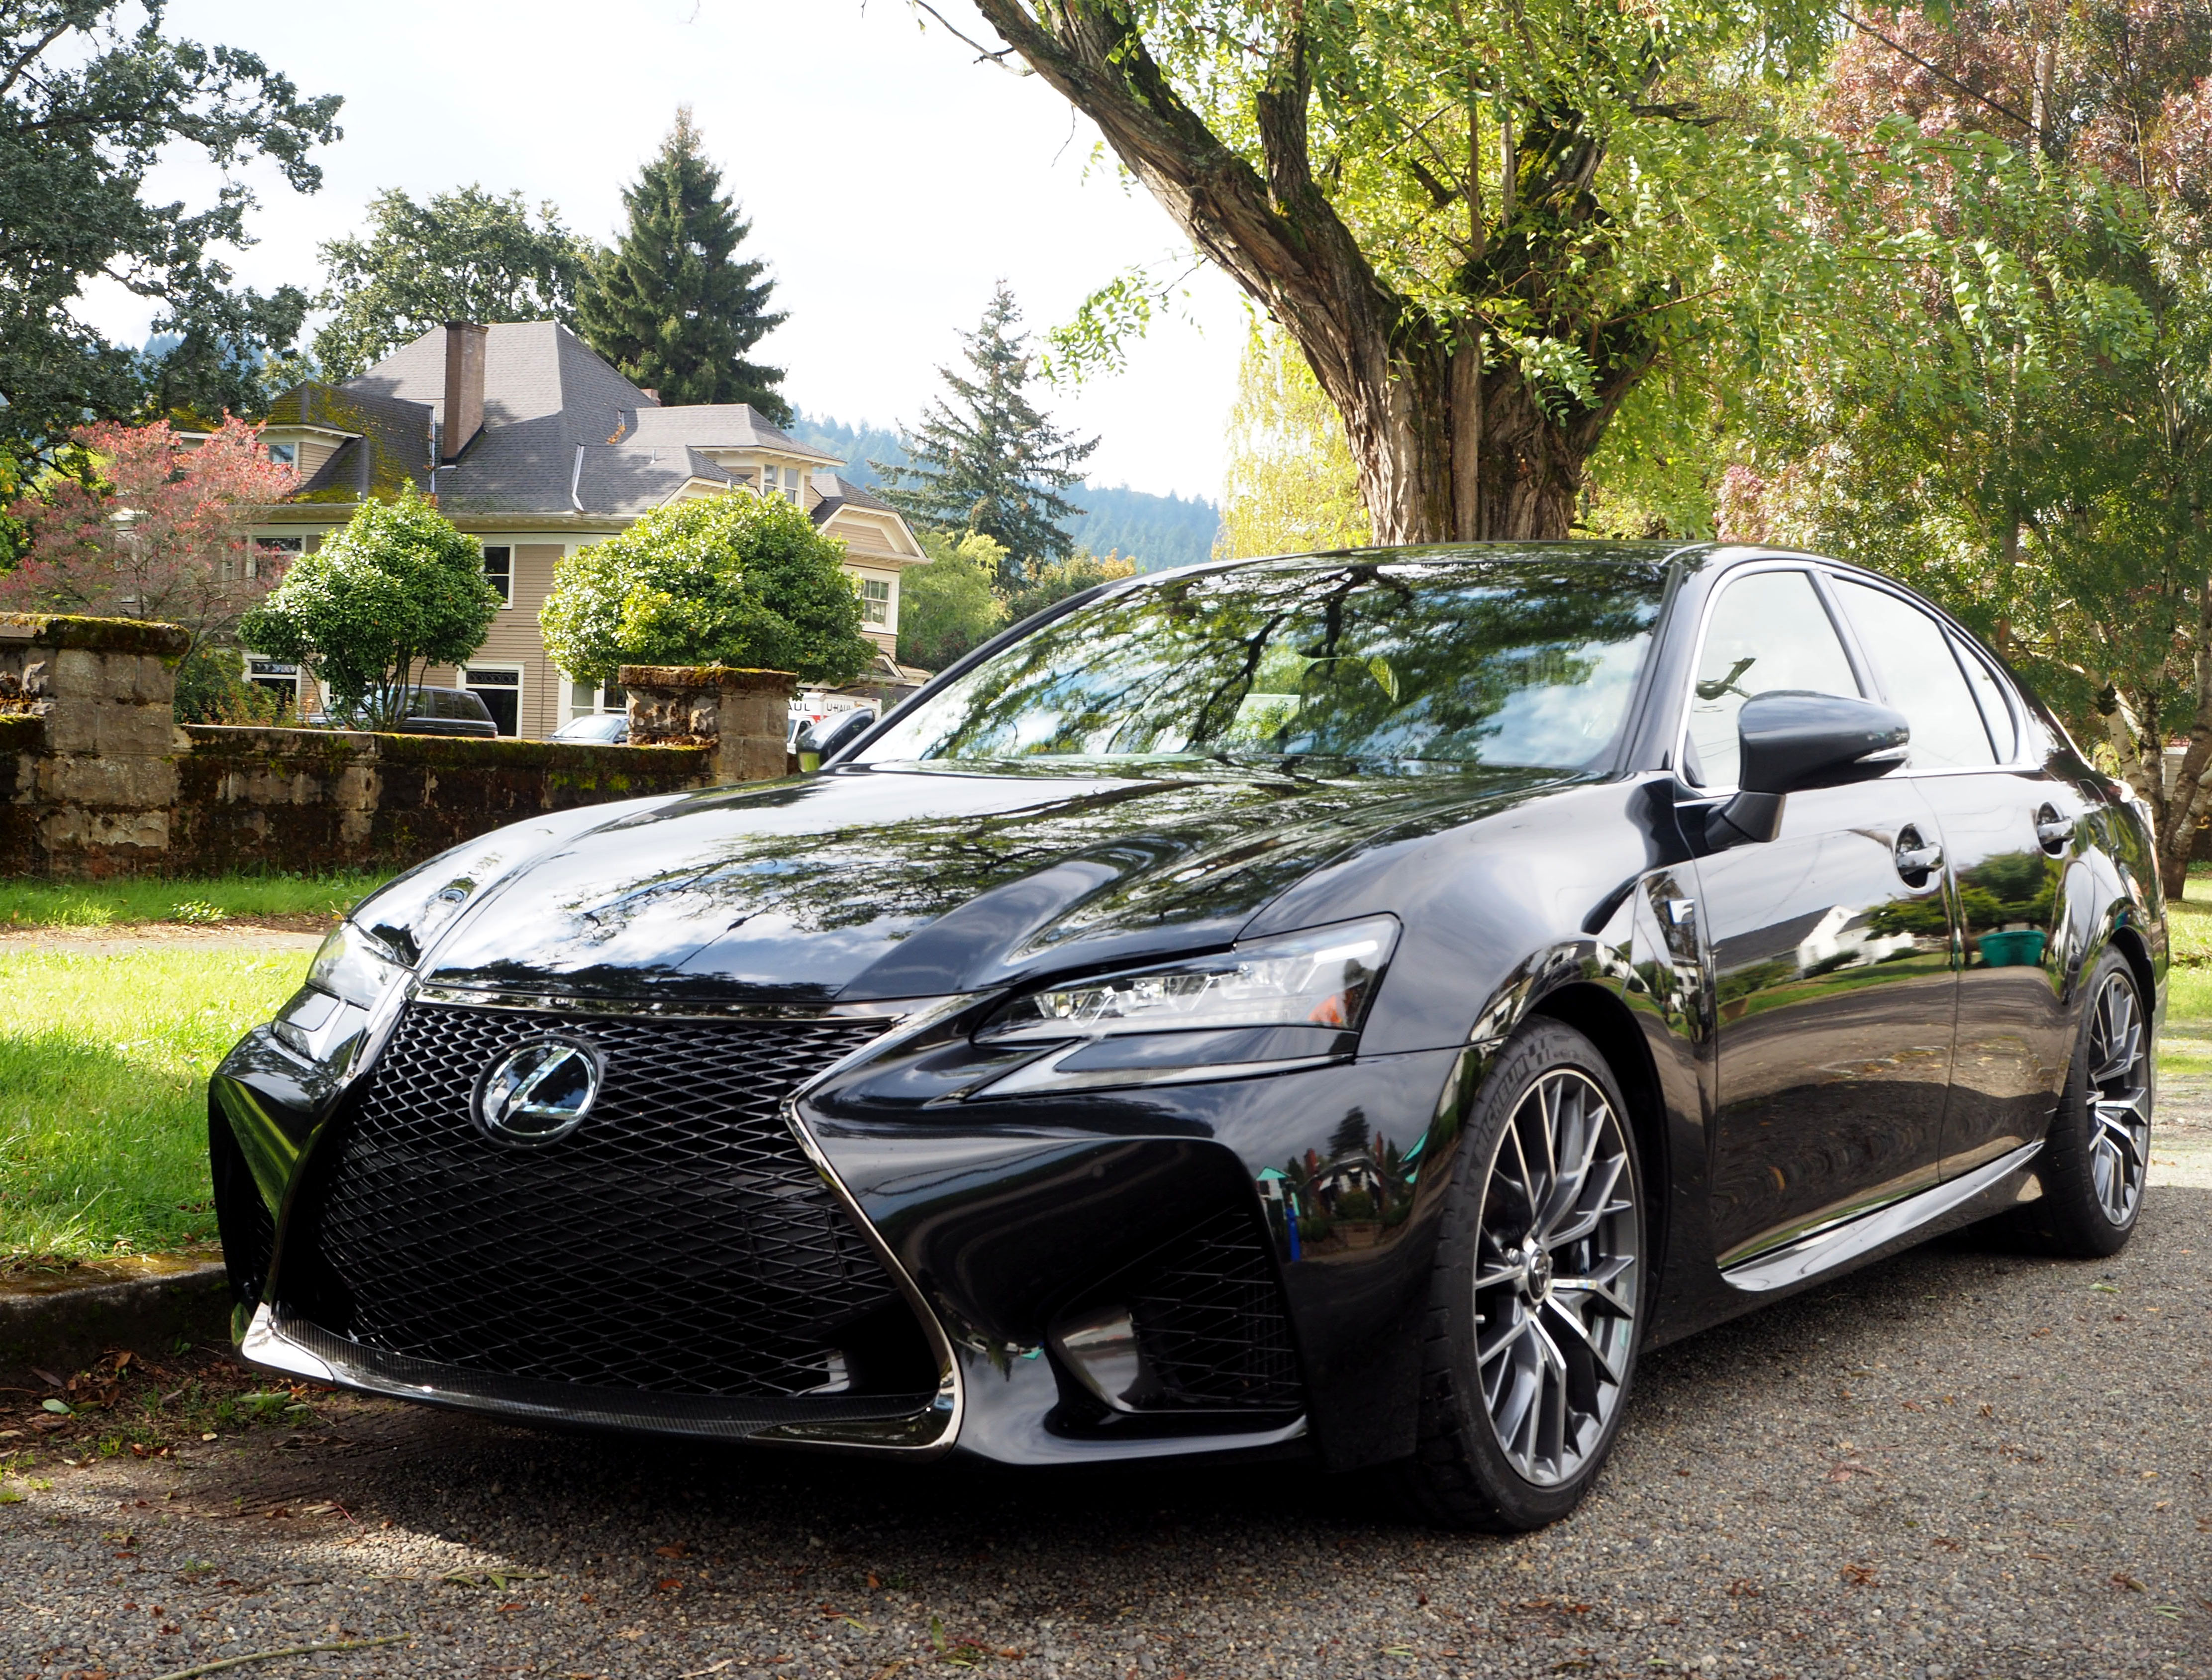 2016 Lexus Gs F Is Fast But Not From The Future Techcrunch